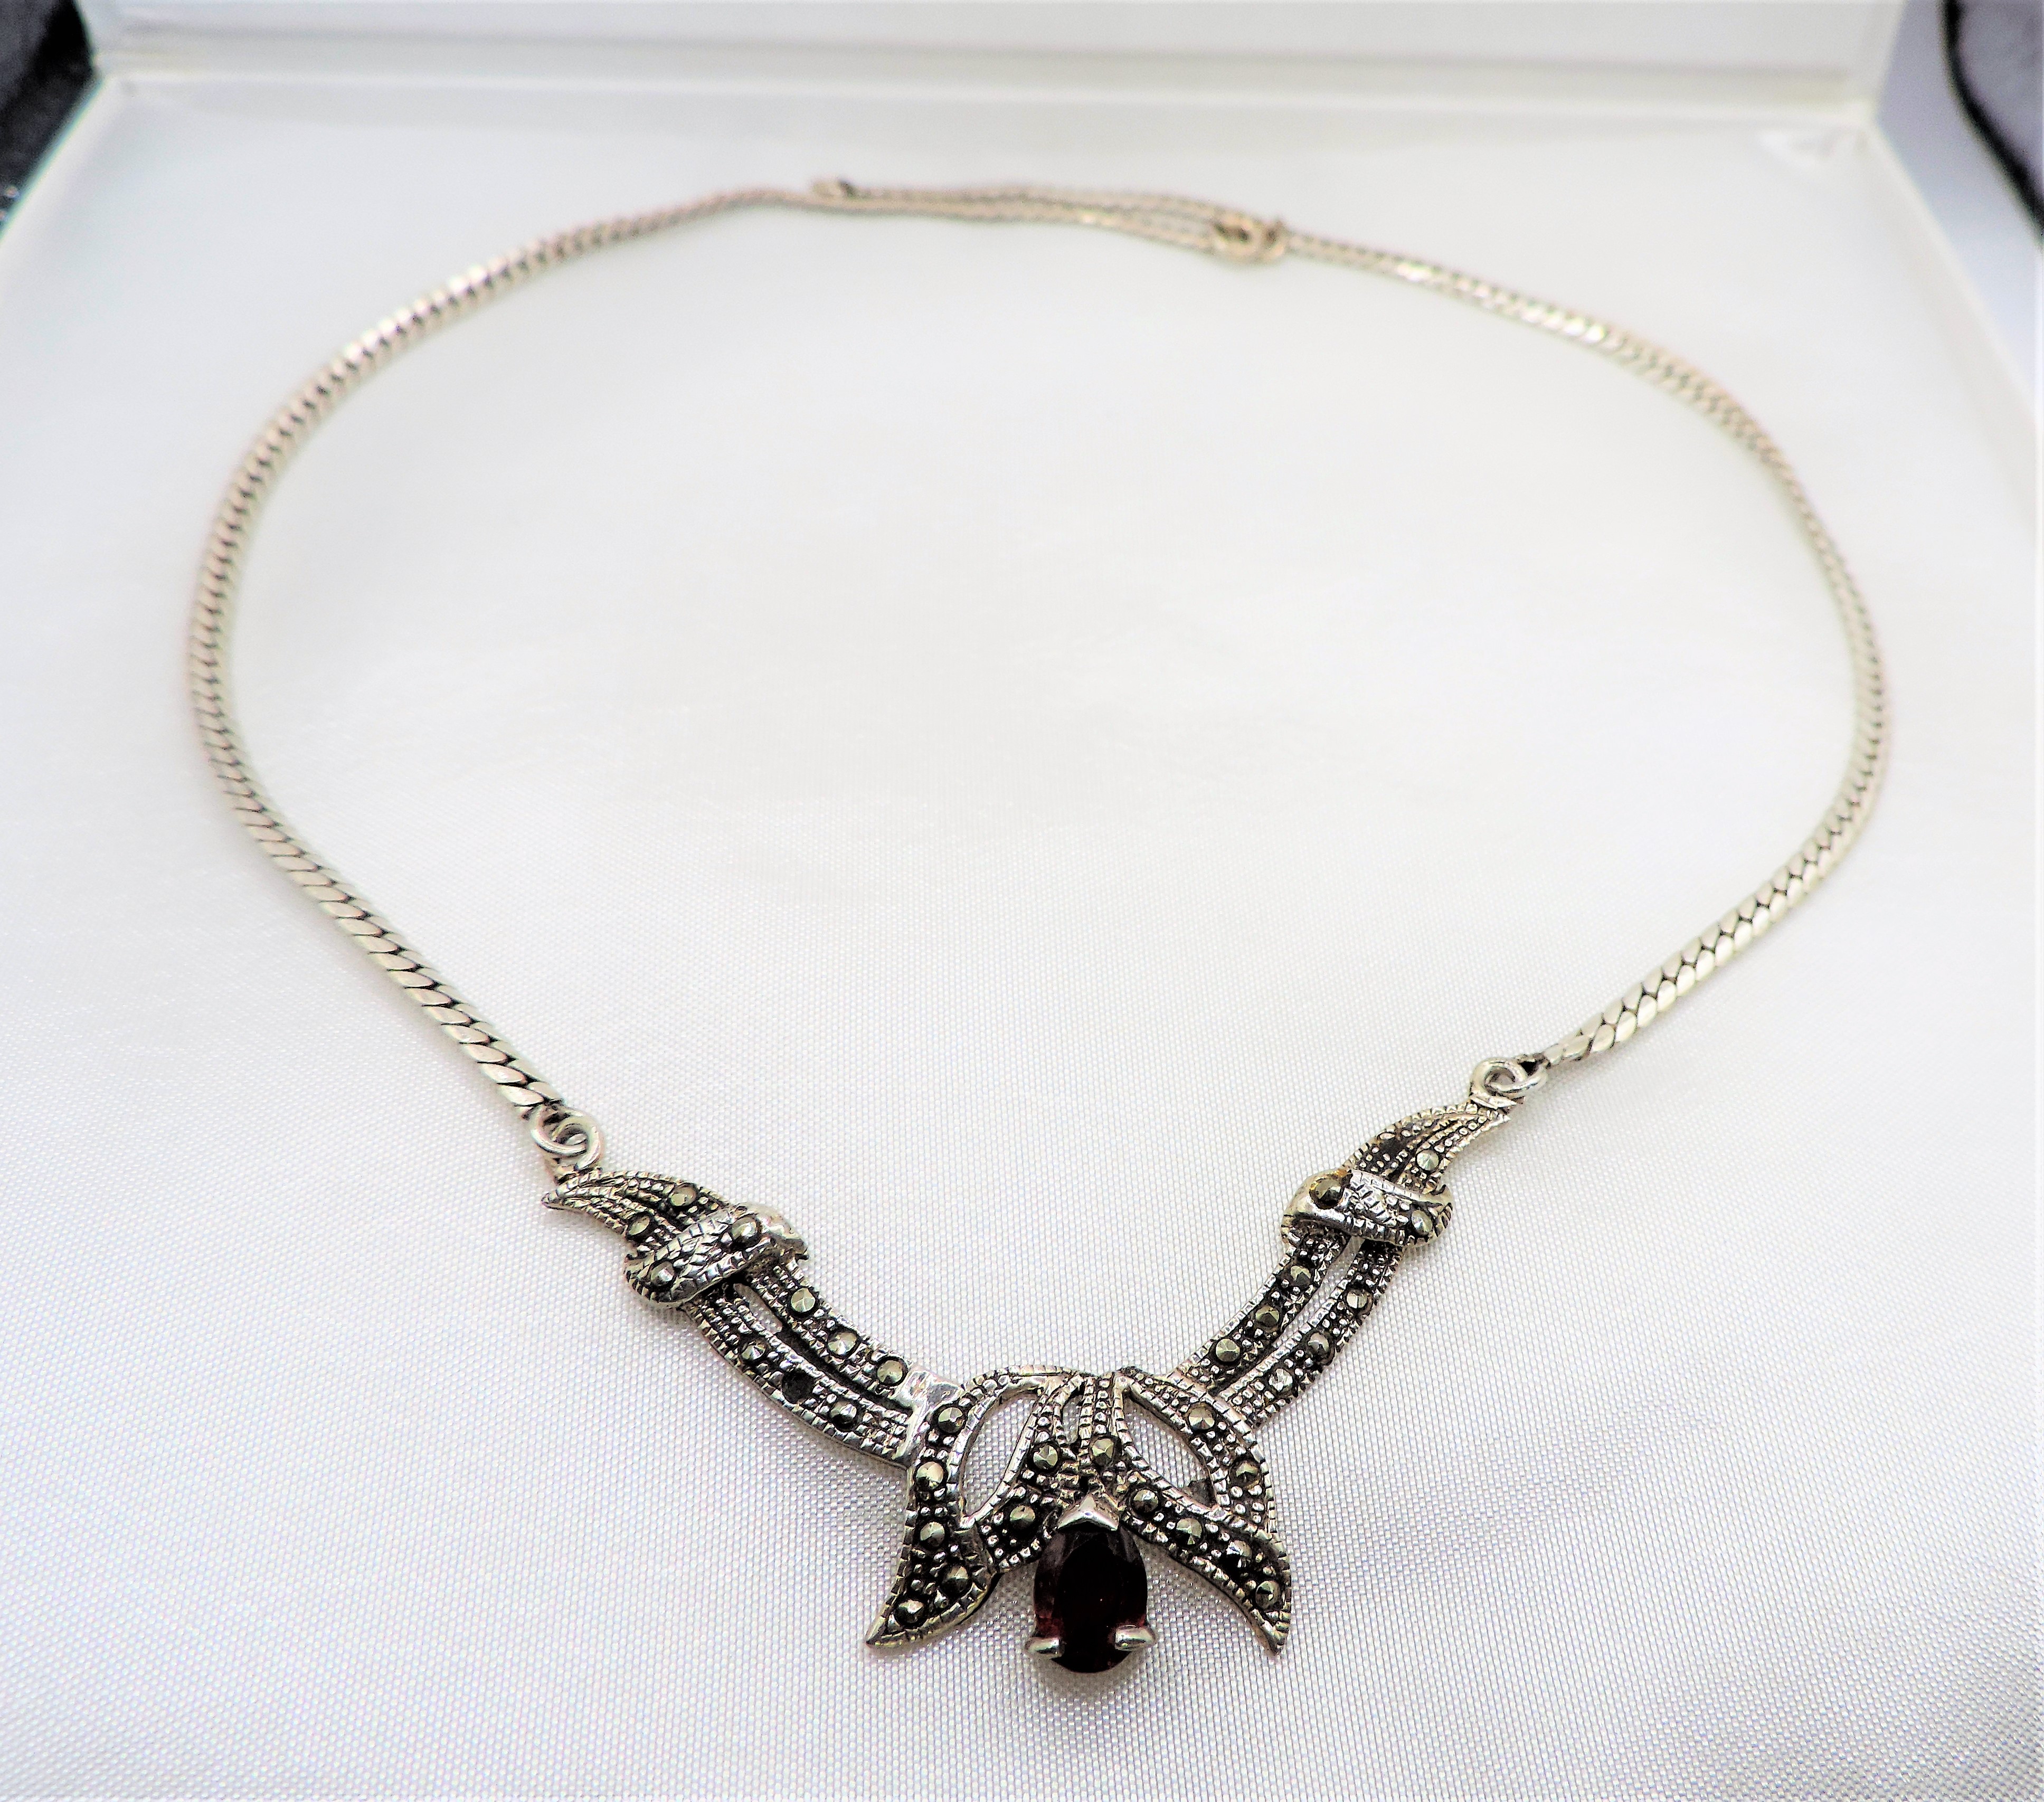 Vintage Marcasite & Garnet Necklace. A lovely necklace 16 inches long set with Marcasites and a